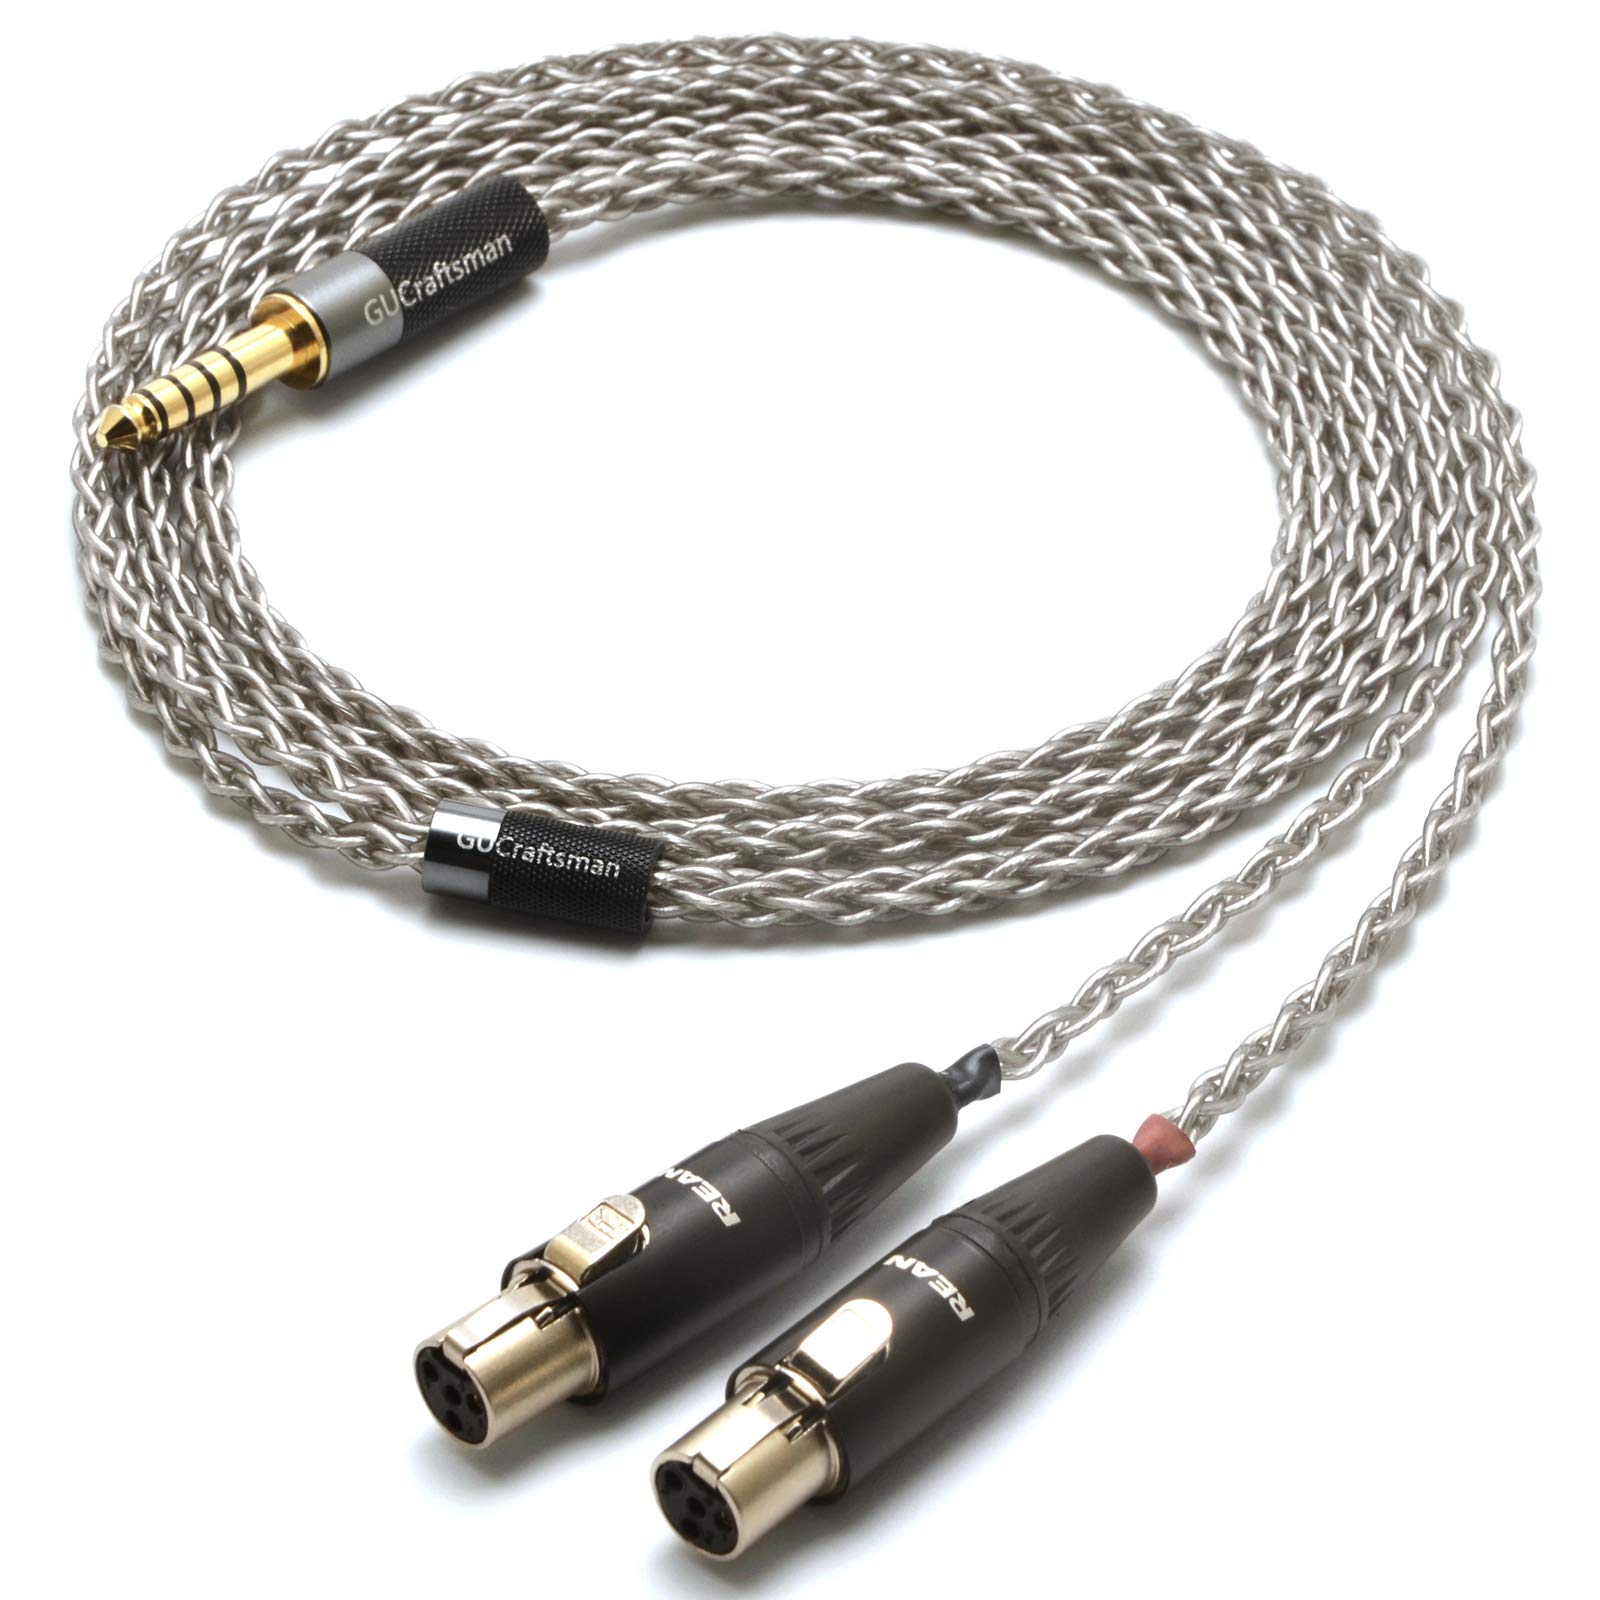 GUCraftsman 6N Single Crystal Silver Upgrade Headphones Cable 4Pin XLR/2.5mm/4.4mm Balanec Headphone Upgrade Cables for AUDEZE LCX-X LCD-XC LCD2 LC...